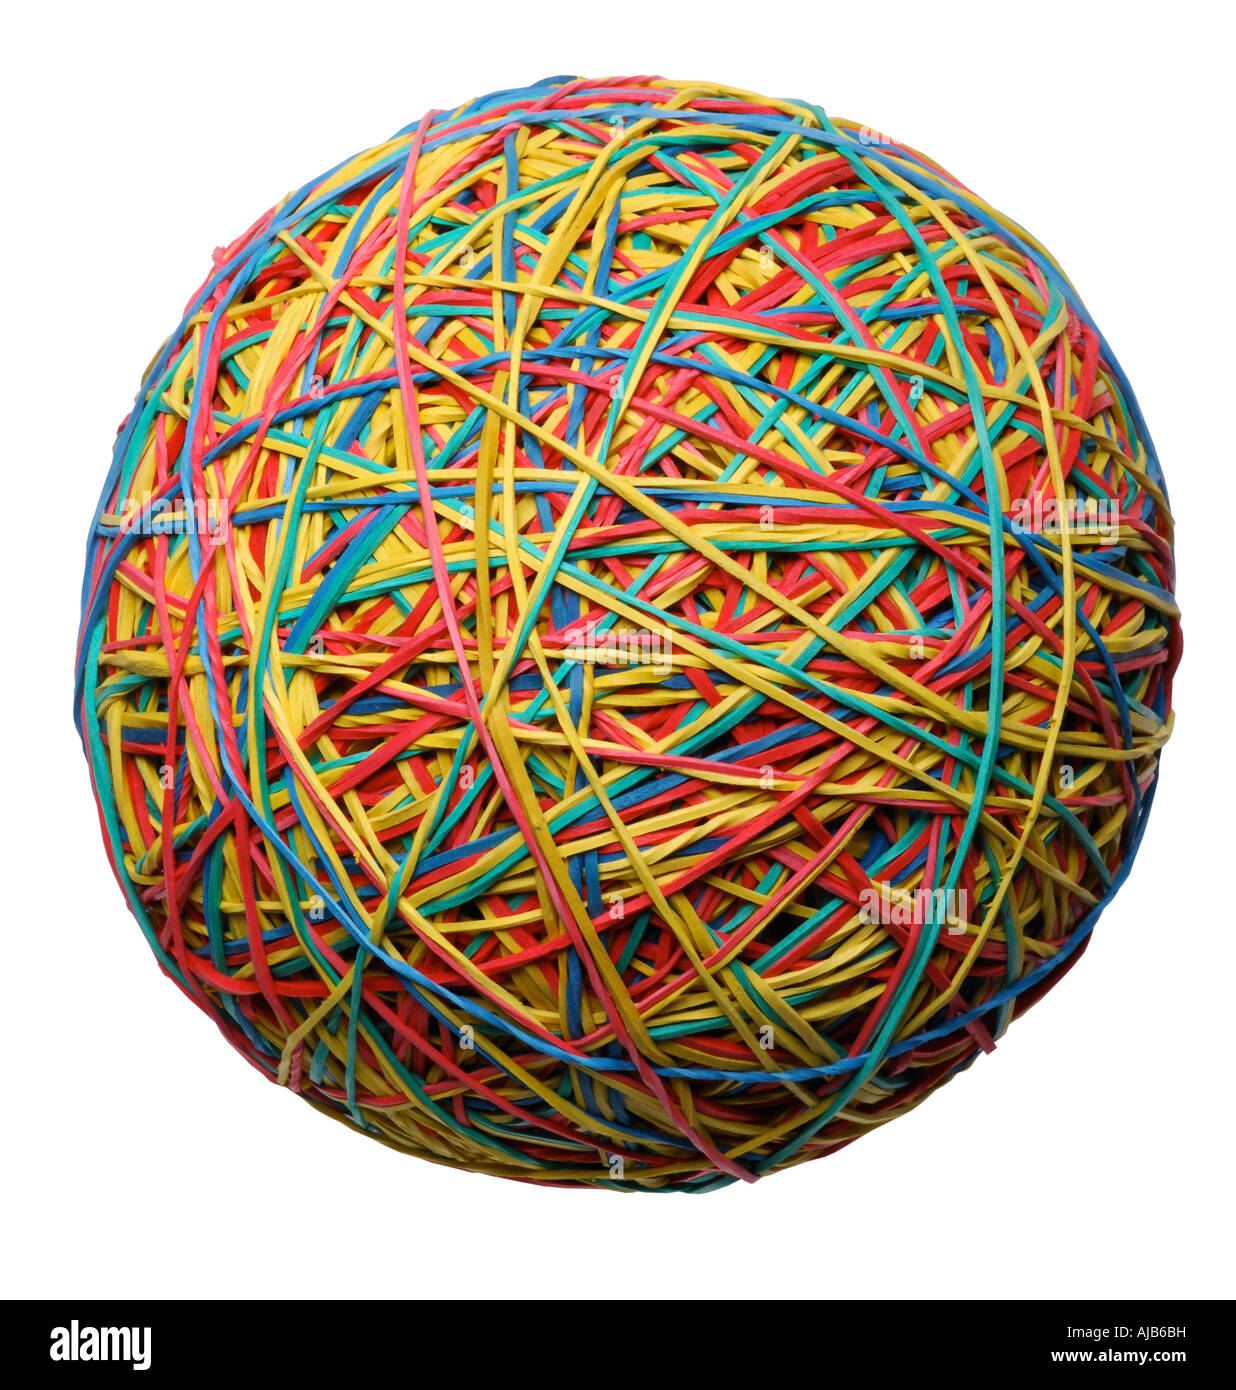 Rubber band ball as cut-out Stock Photo